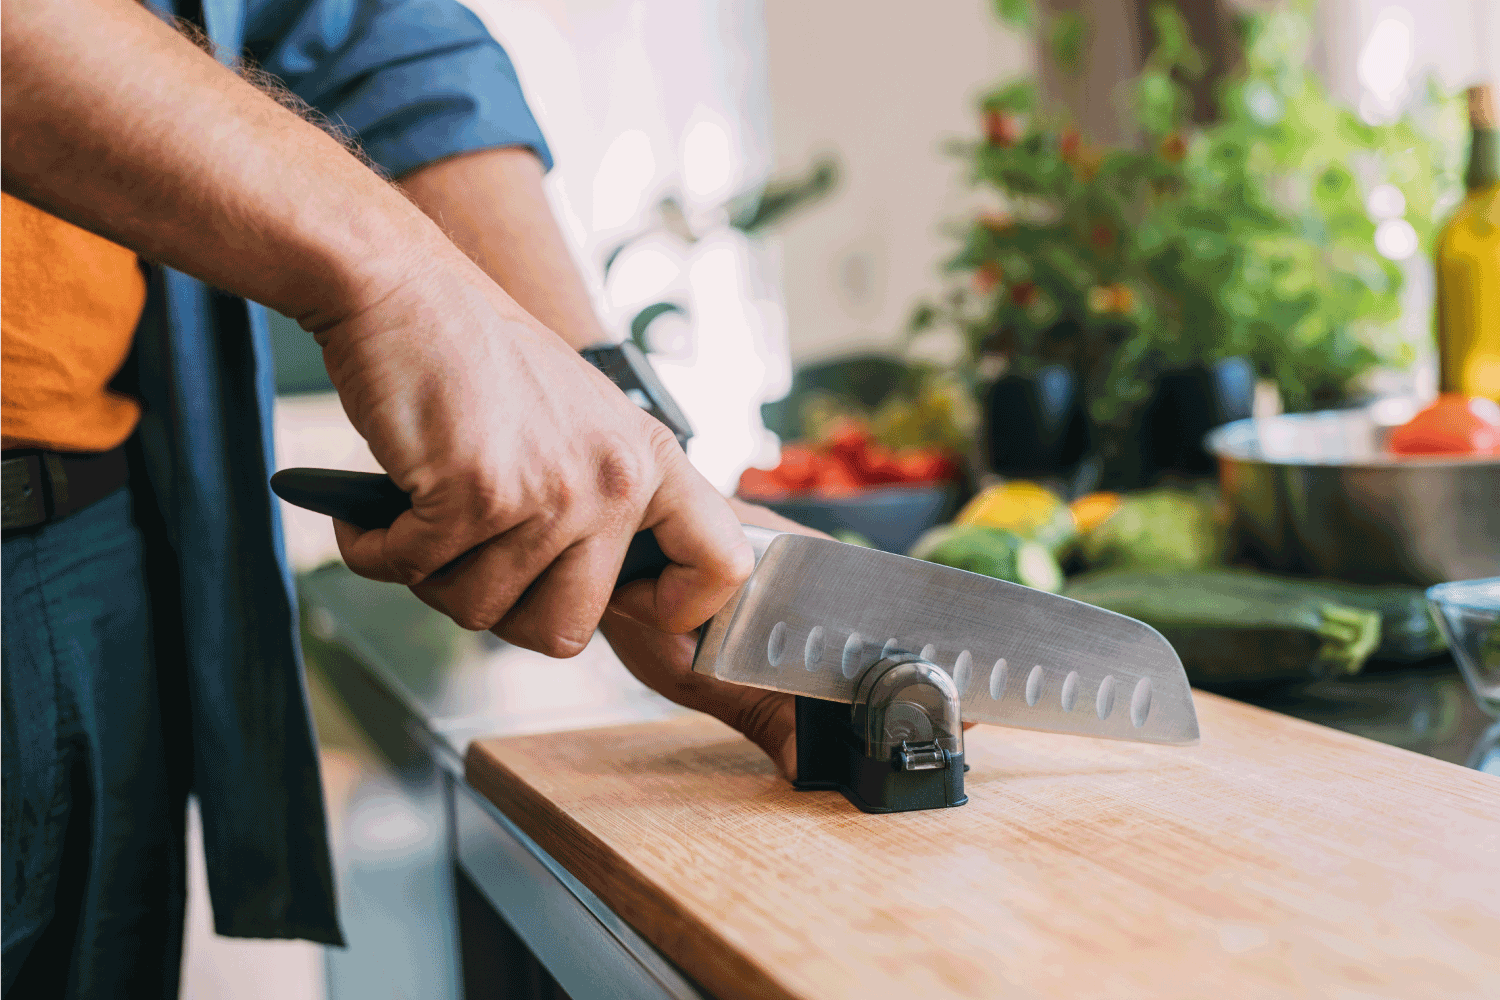 man sharpening a knife using a knife sharpener on a cutting board in a kitchen.